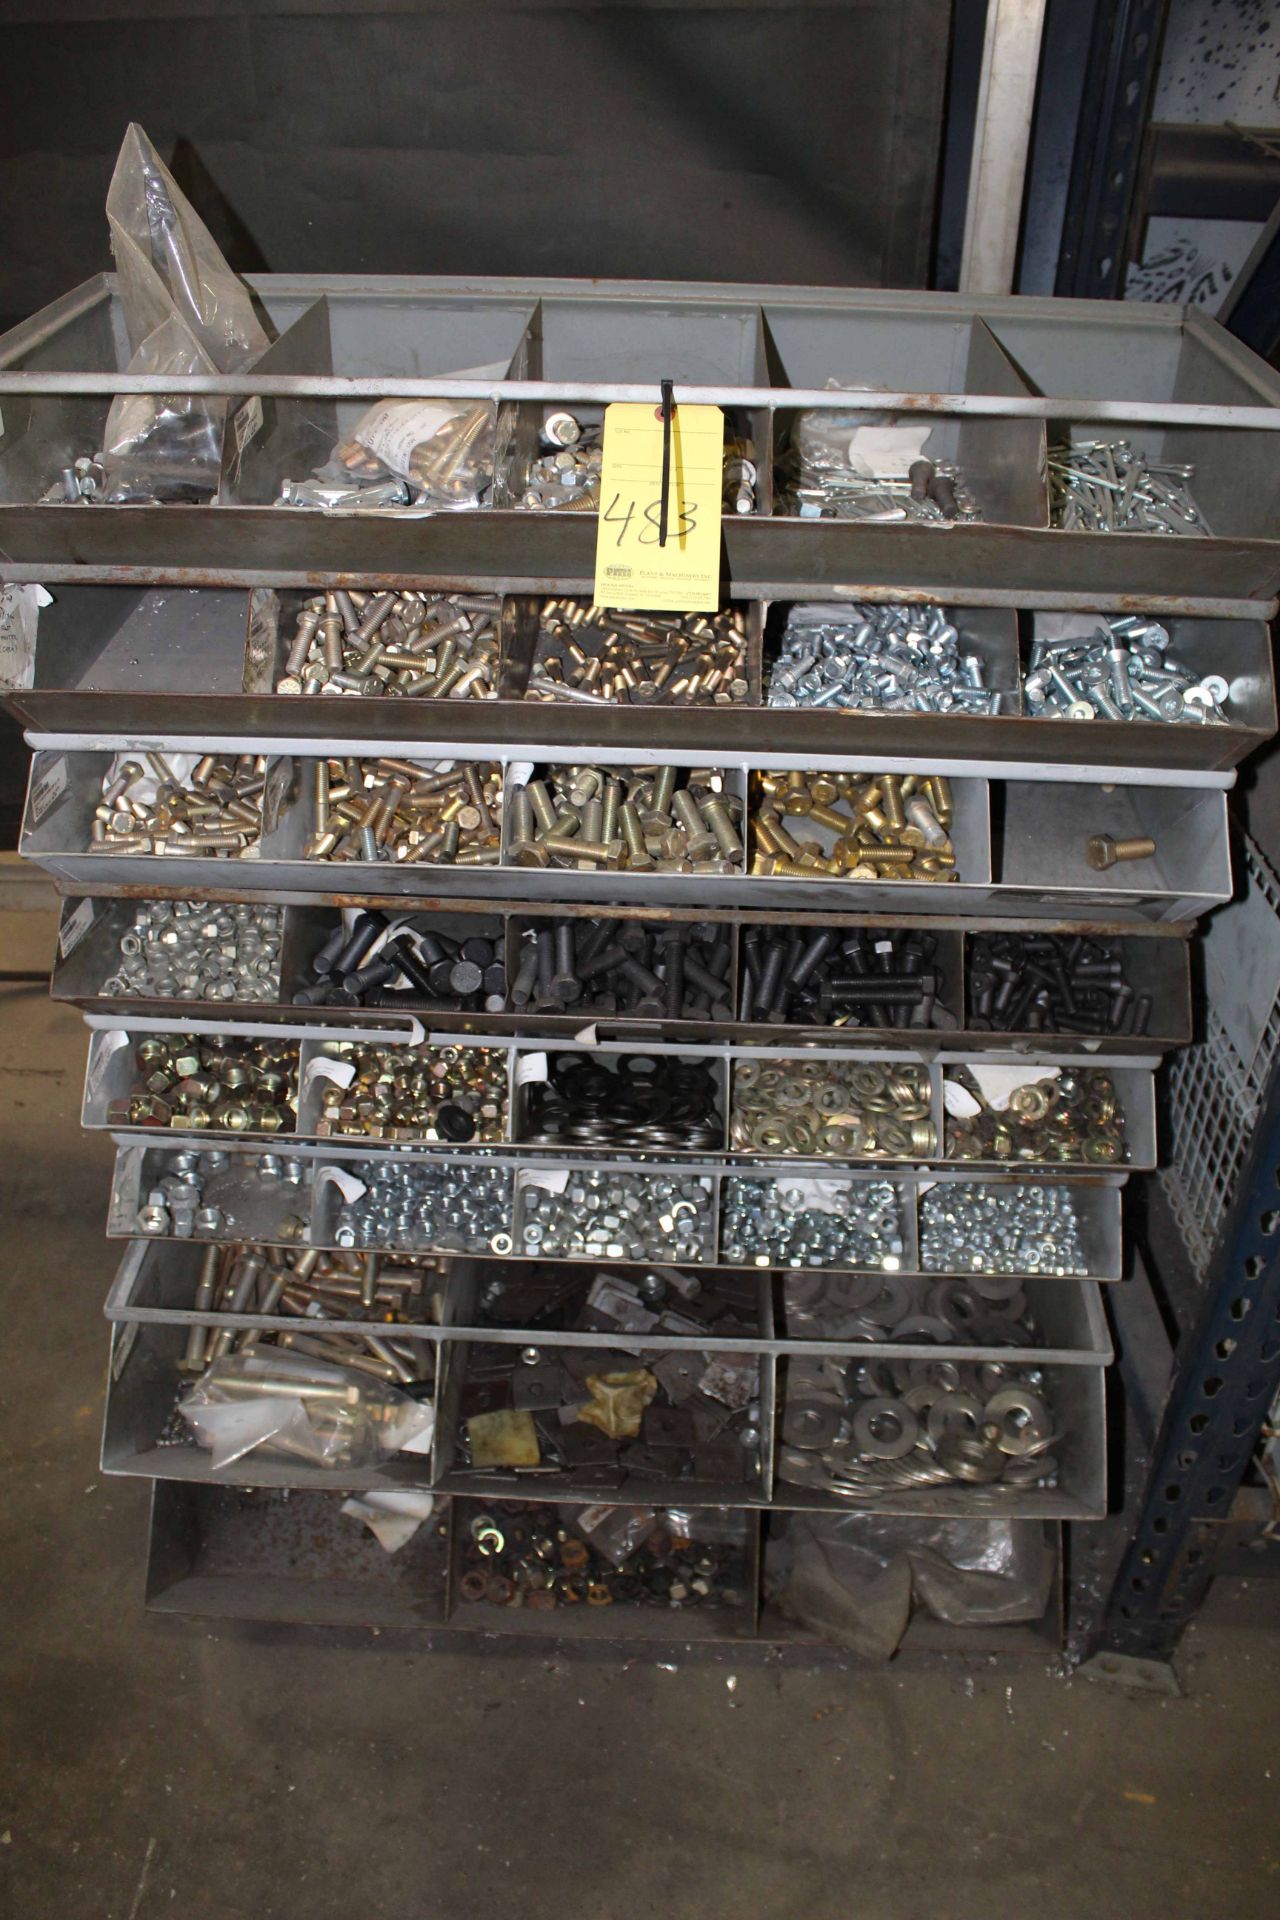 LOT CONSISTING OF: bolts, cotter pins, washers (in metal bin)